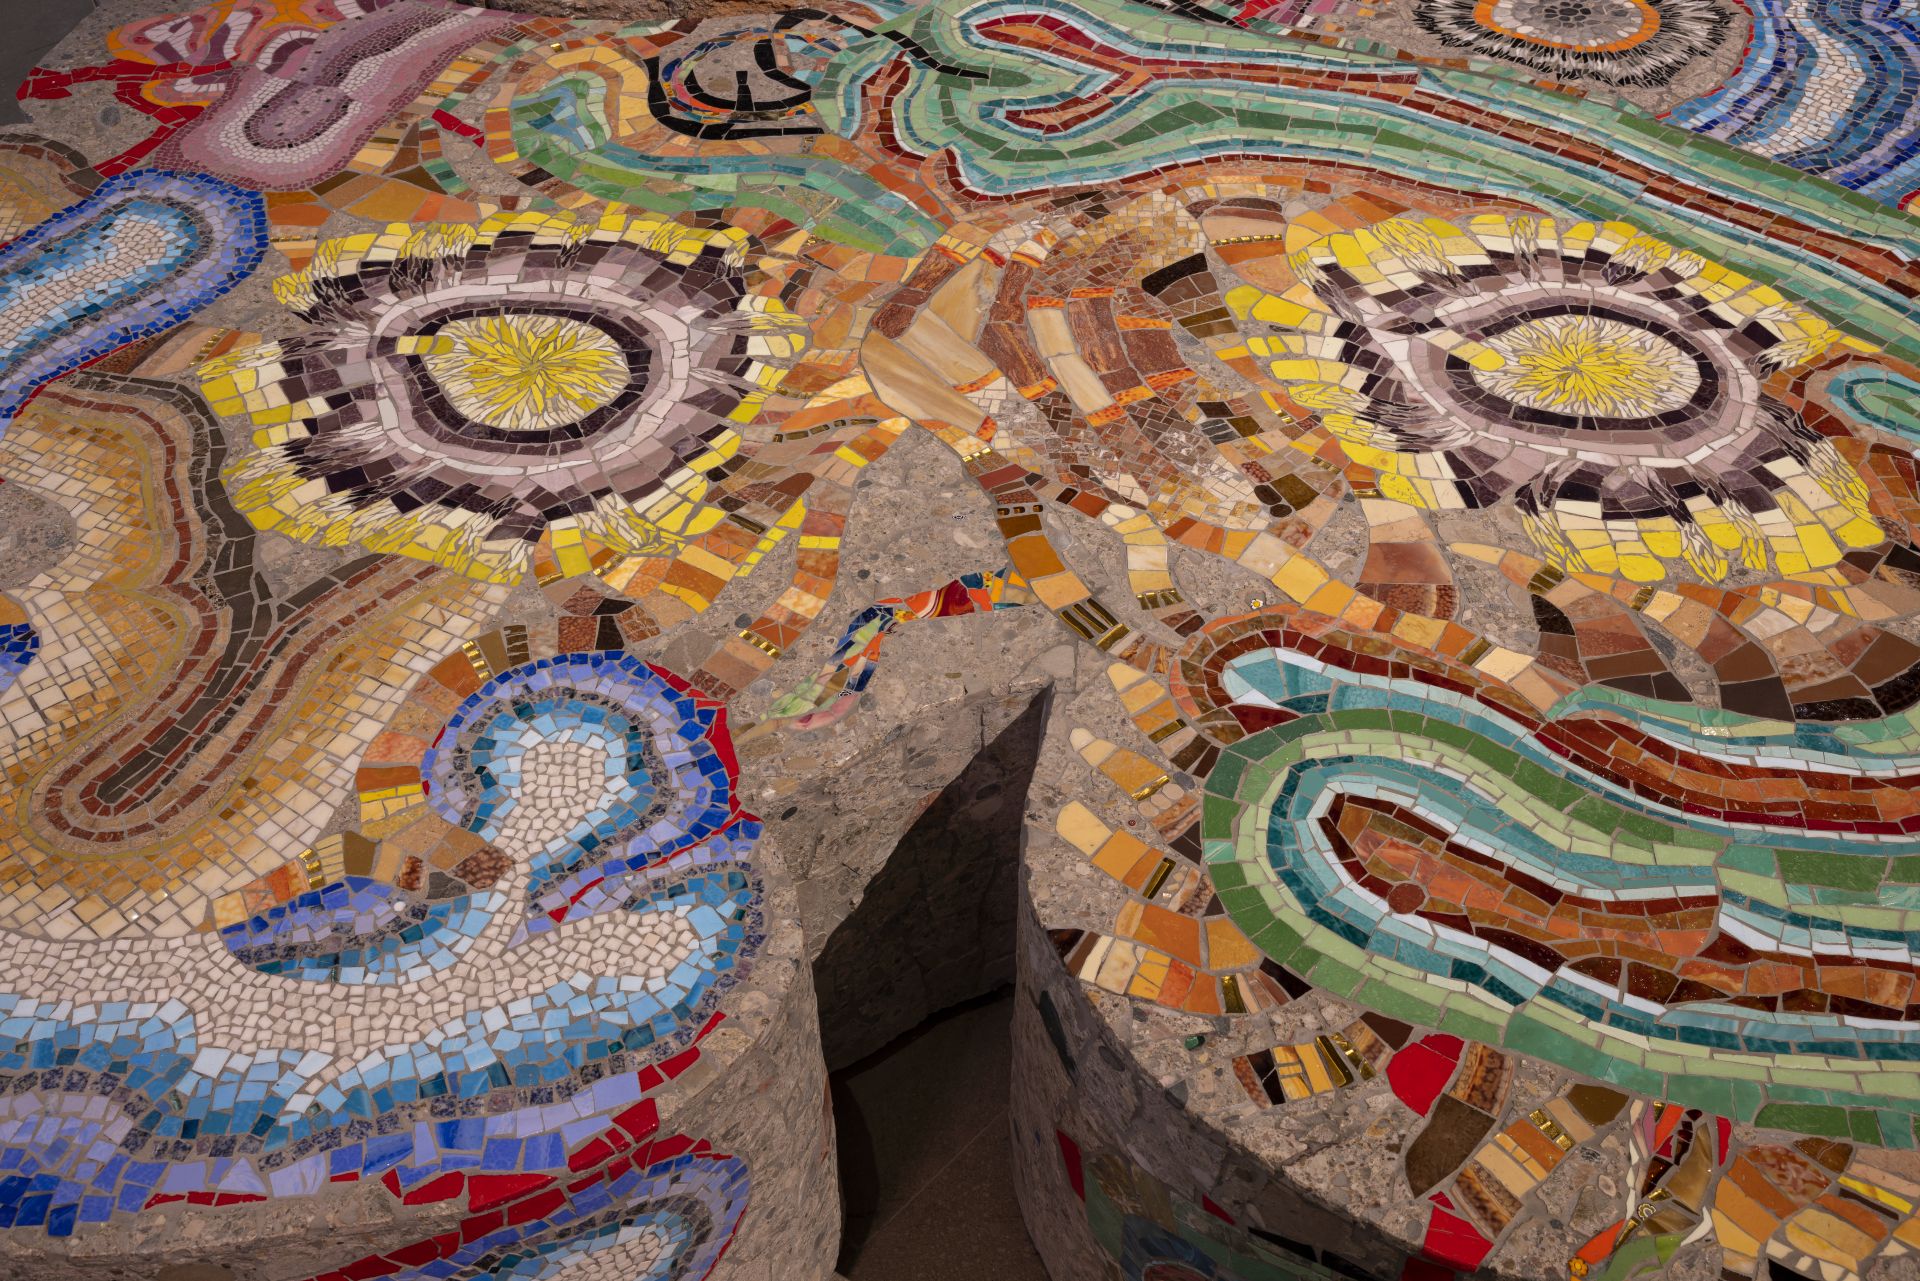 Part of a bench made of mosaic and stones by Kerstin Brätsch at the Venice Biennale